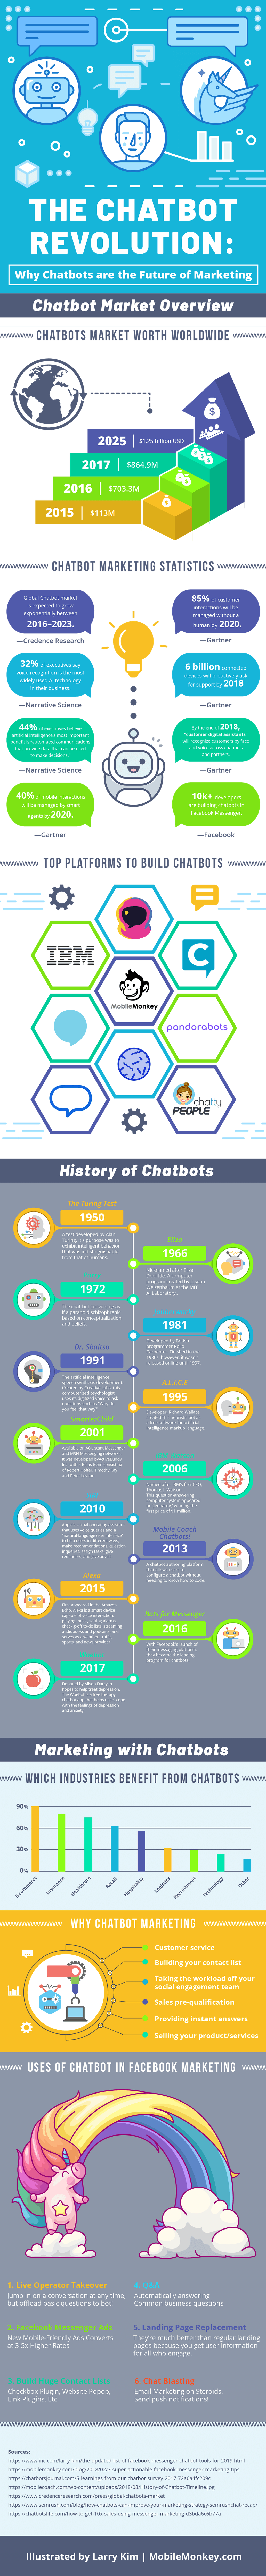 Is Chatbot the Future of Marketing